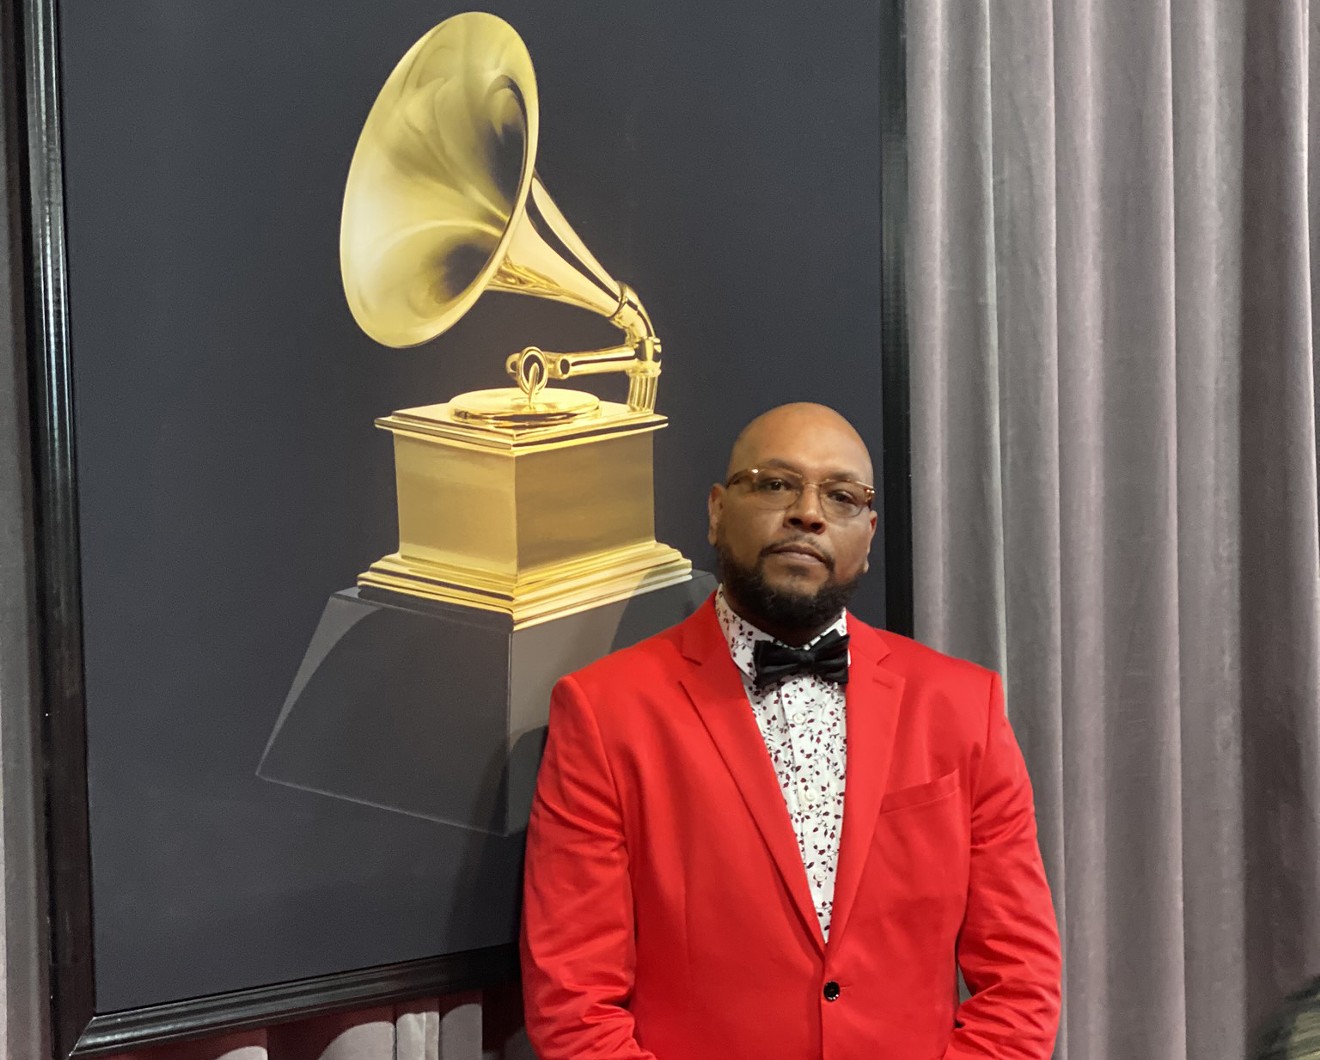 Bobby Rogers at this year's Grammy Awards.